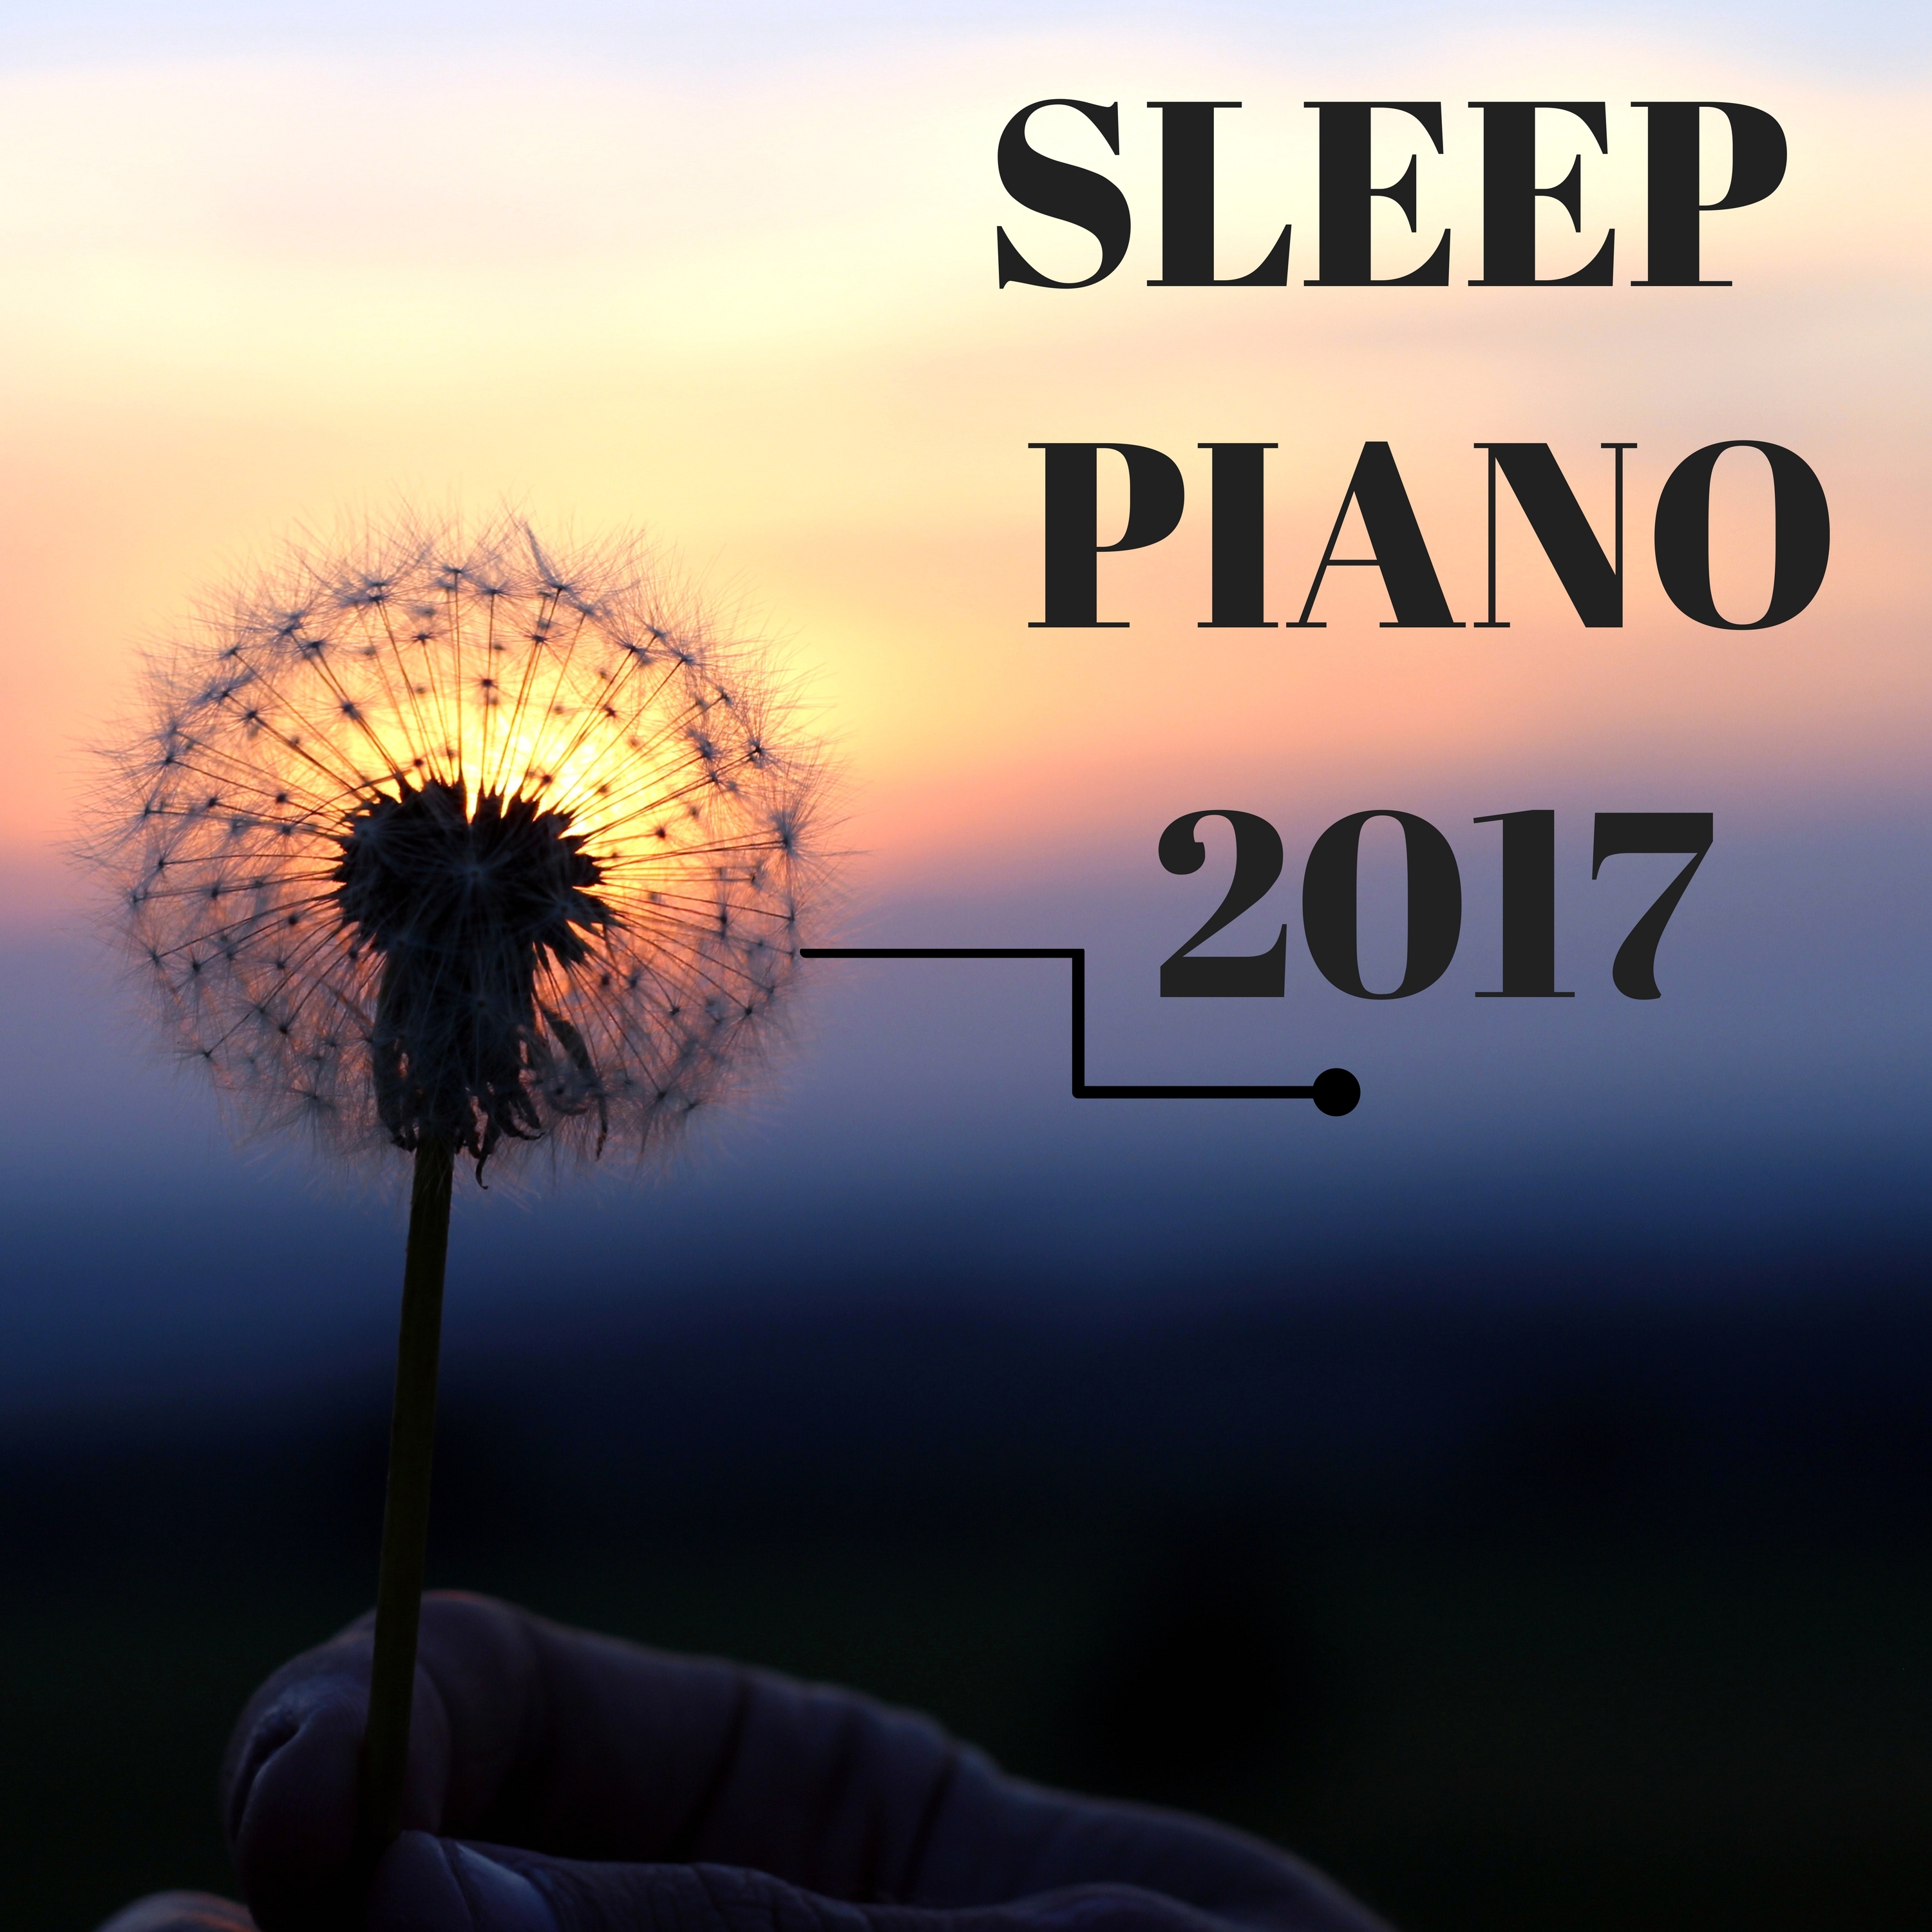 Sleep Piano 2017 - Smooth Soothing Piano Instrumental Background Collection for Sleeping